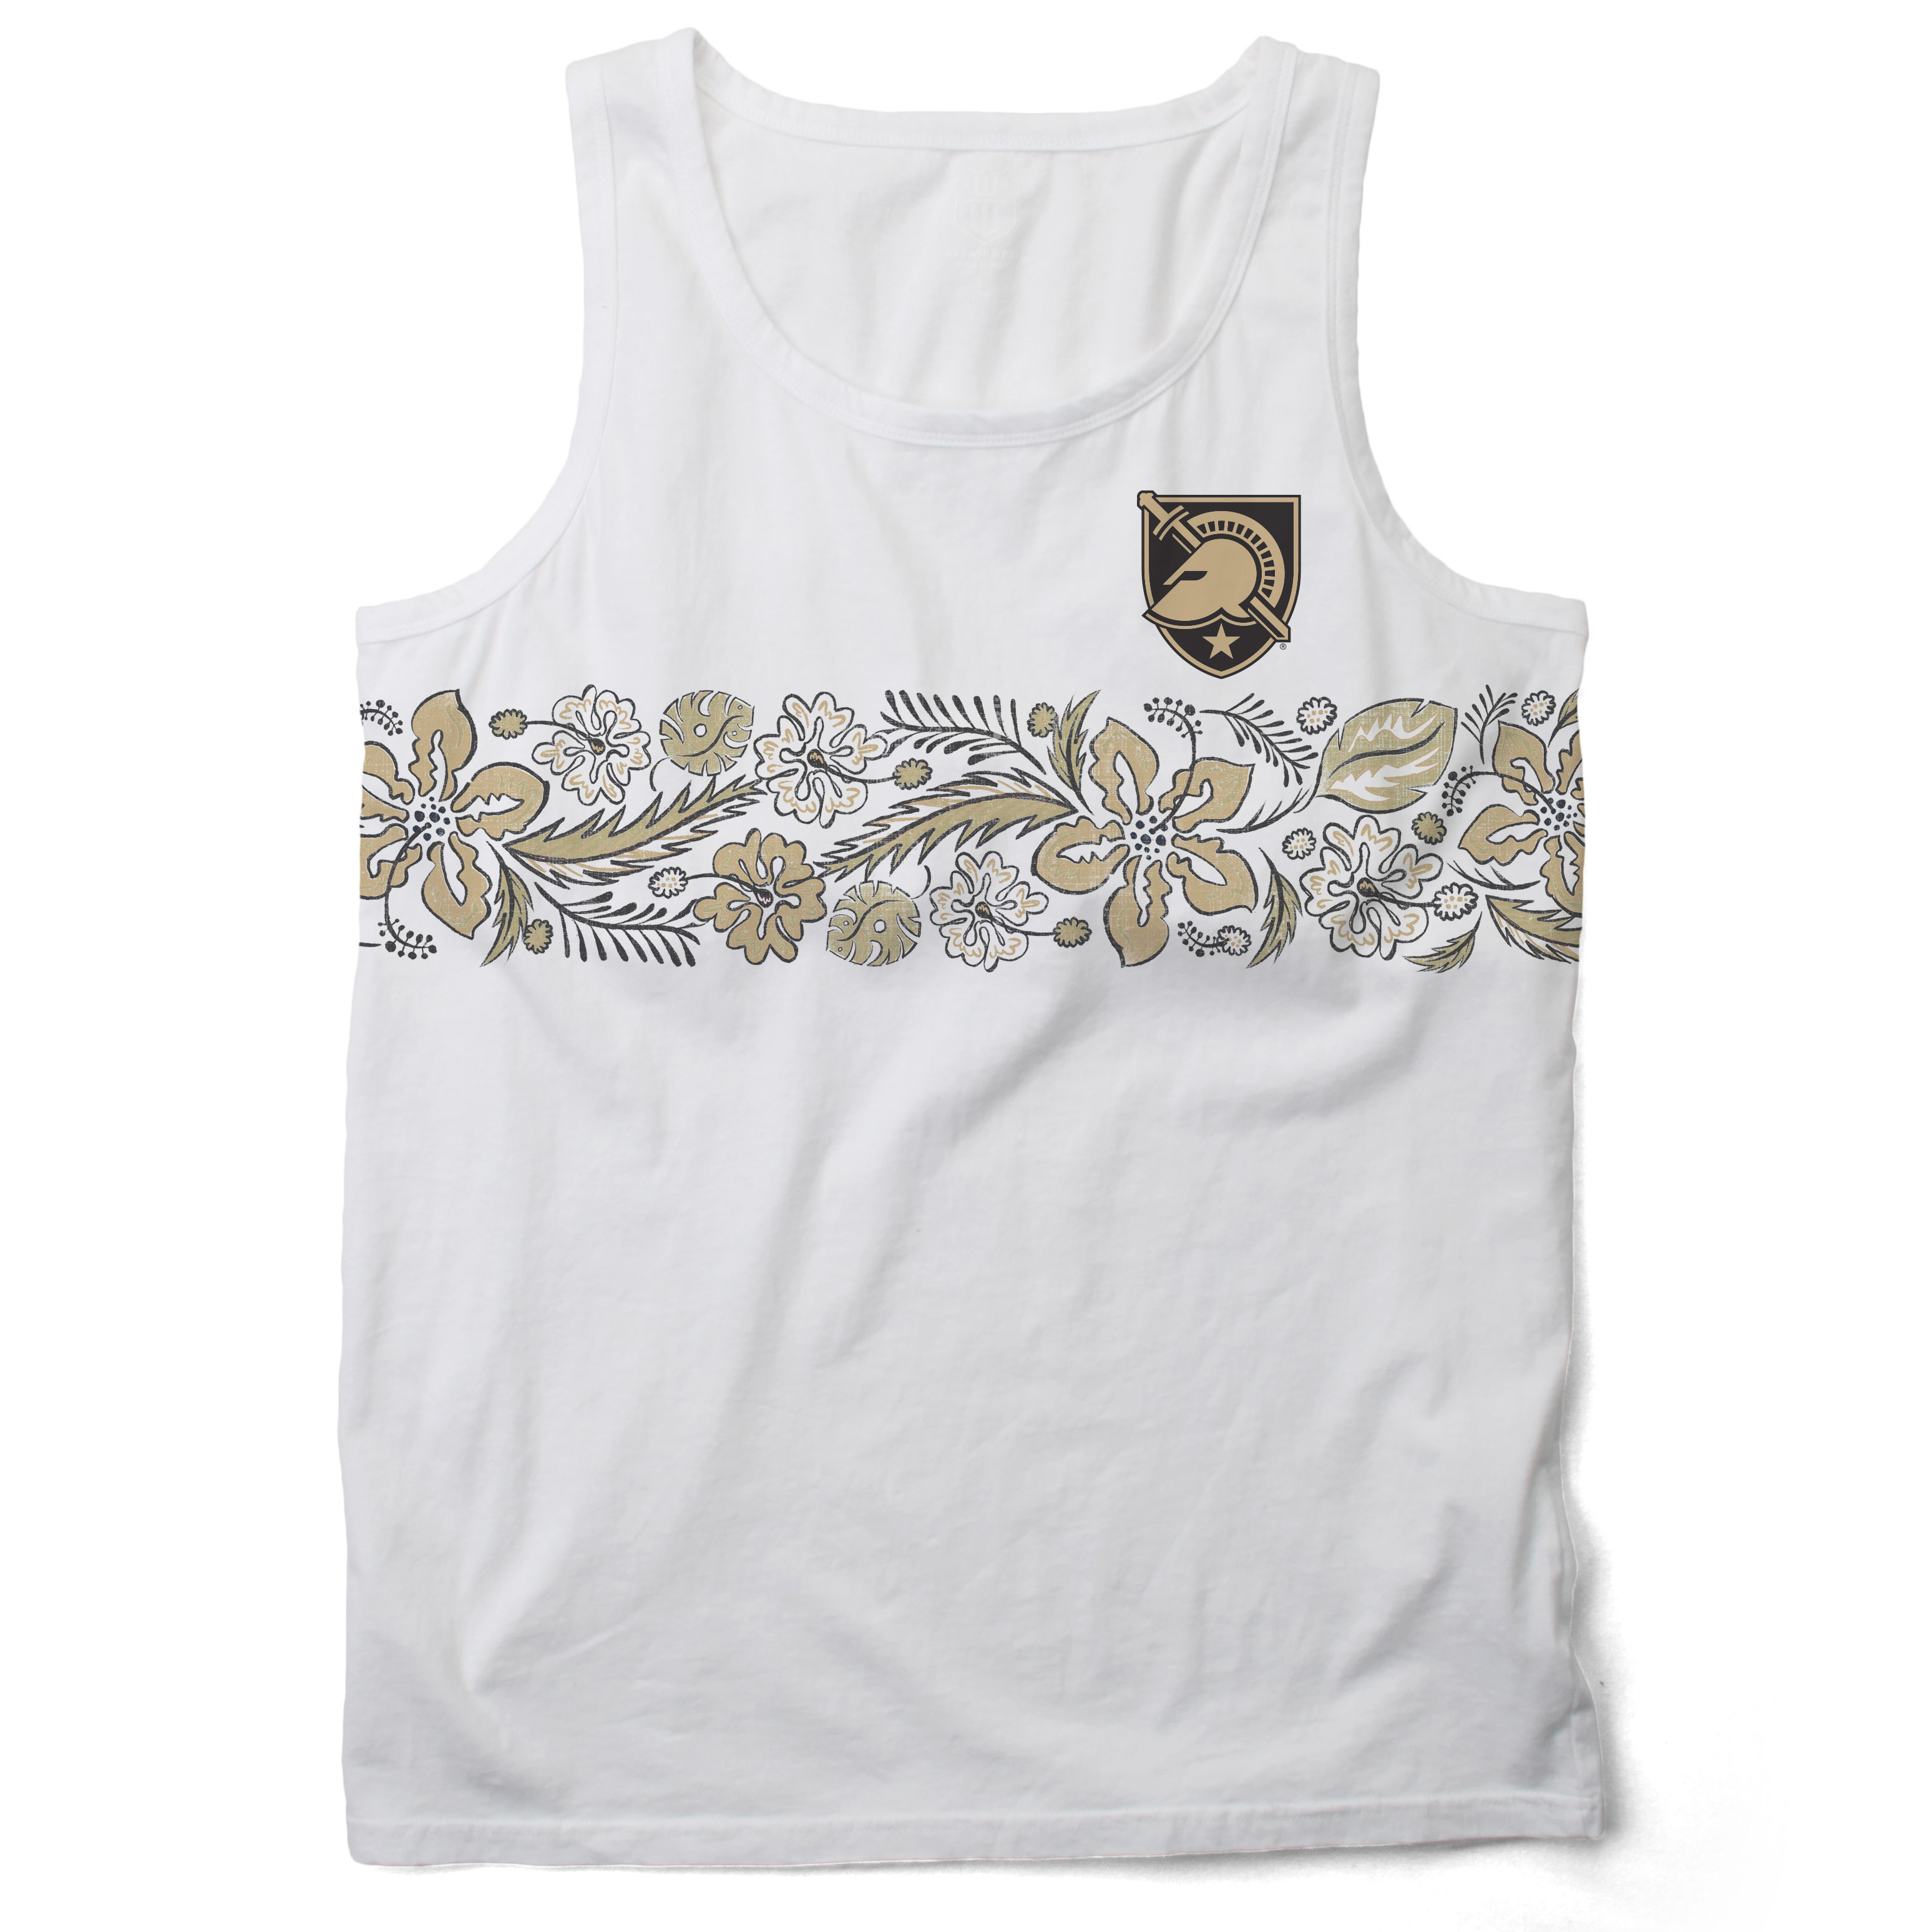 Wes And Willy Army Black Knights Mens Floral Tank Top